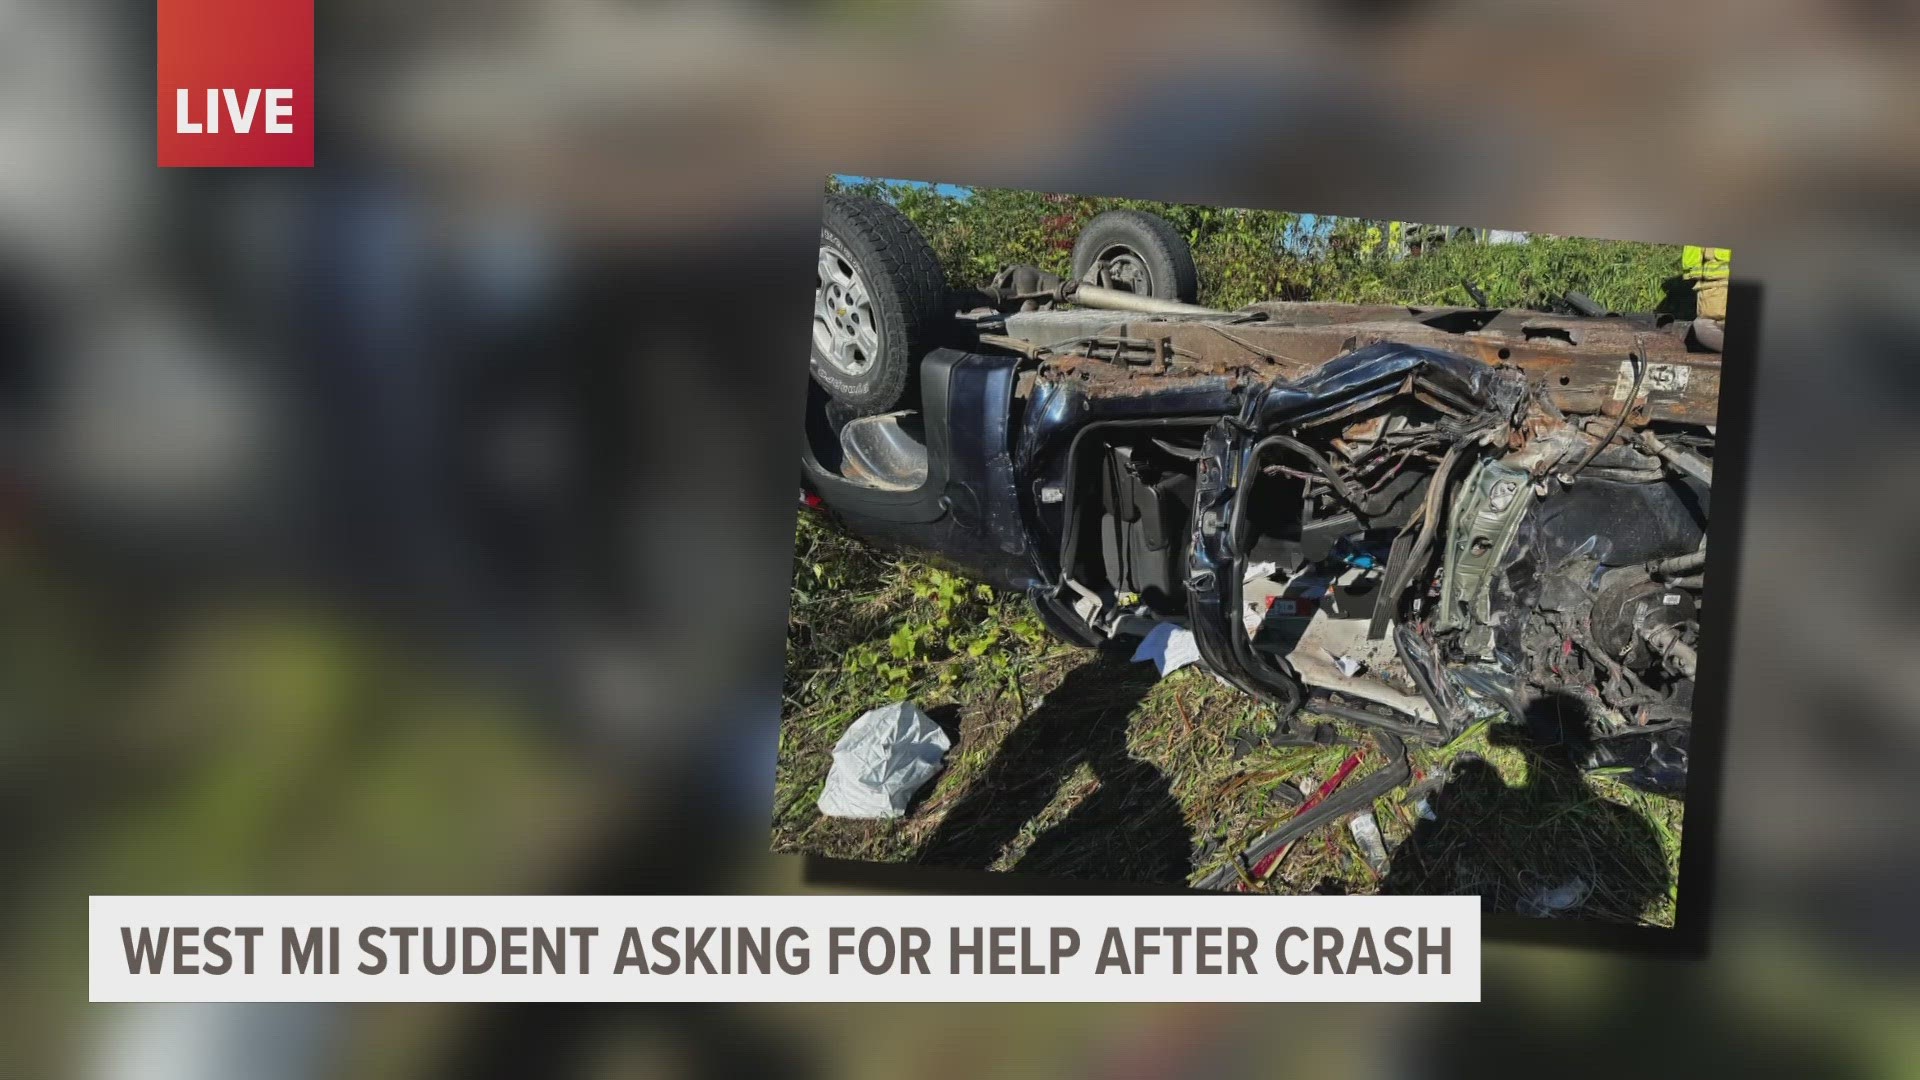 Michelle Zahm, 18, was involved in a crash with farming equipment back in September and is still recovering.